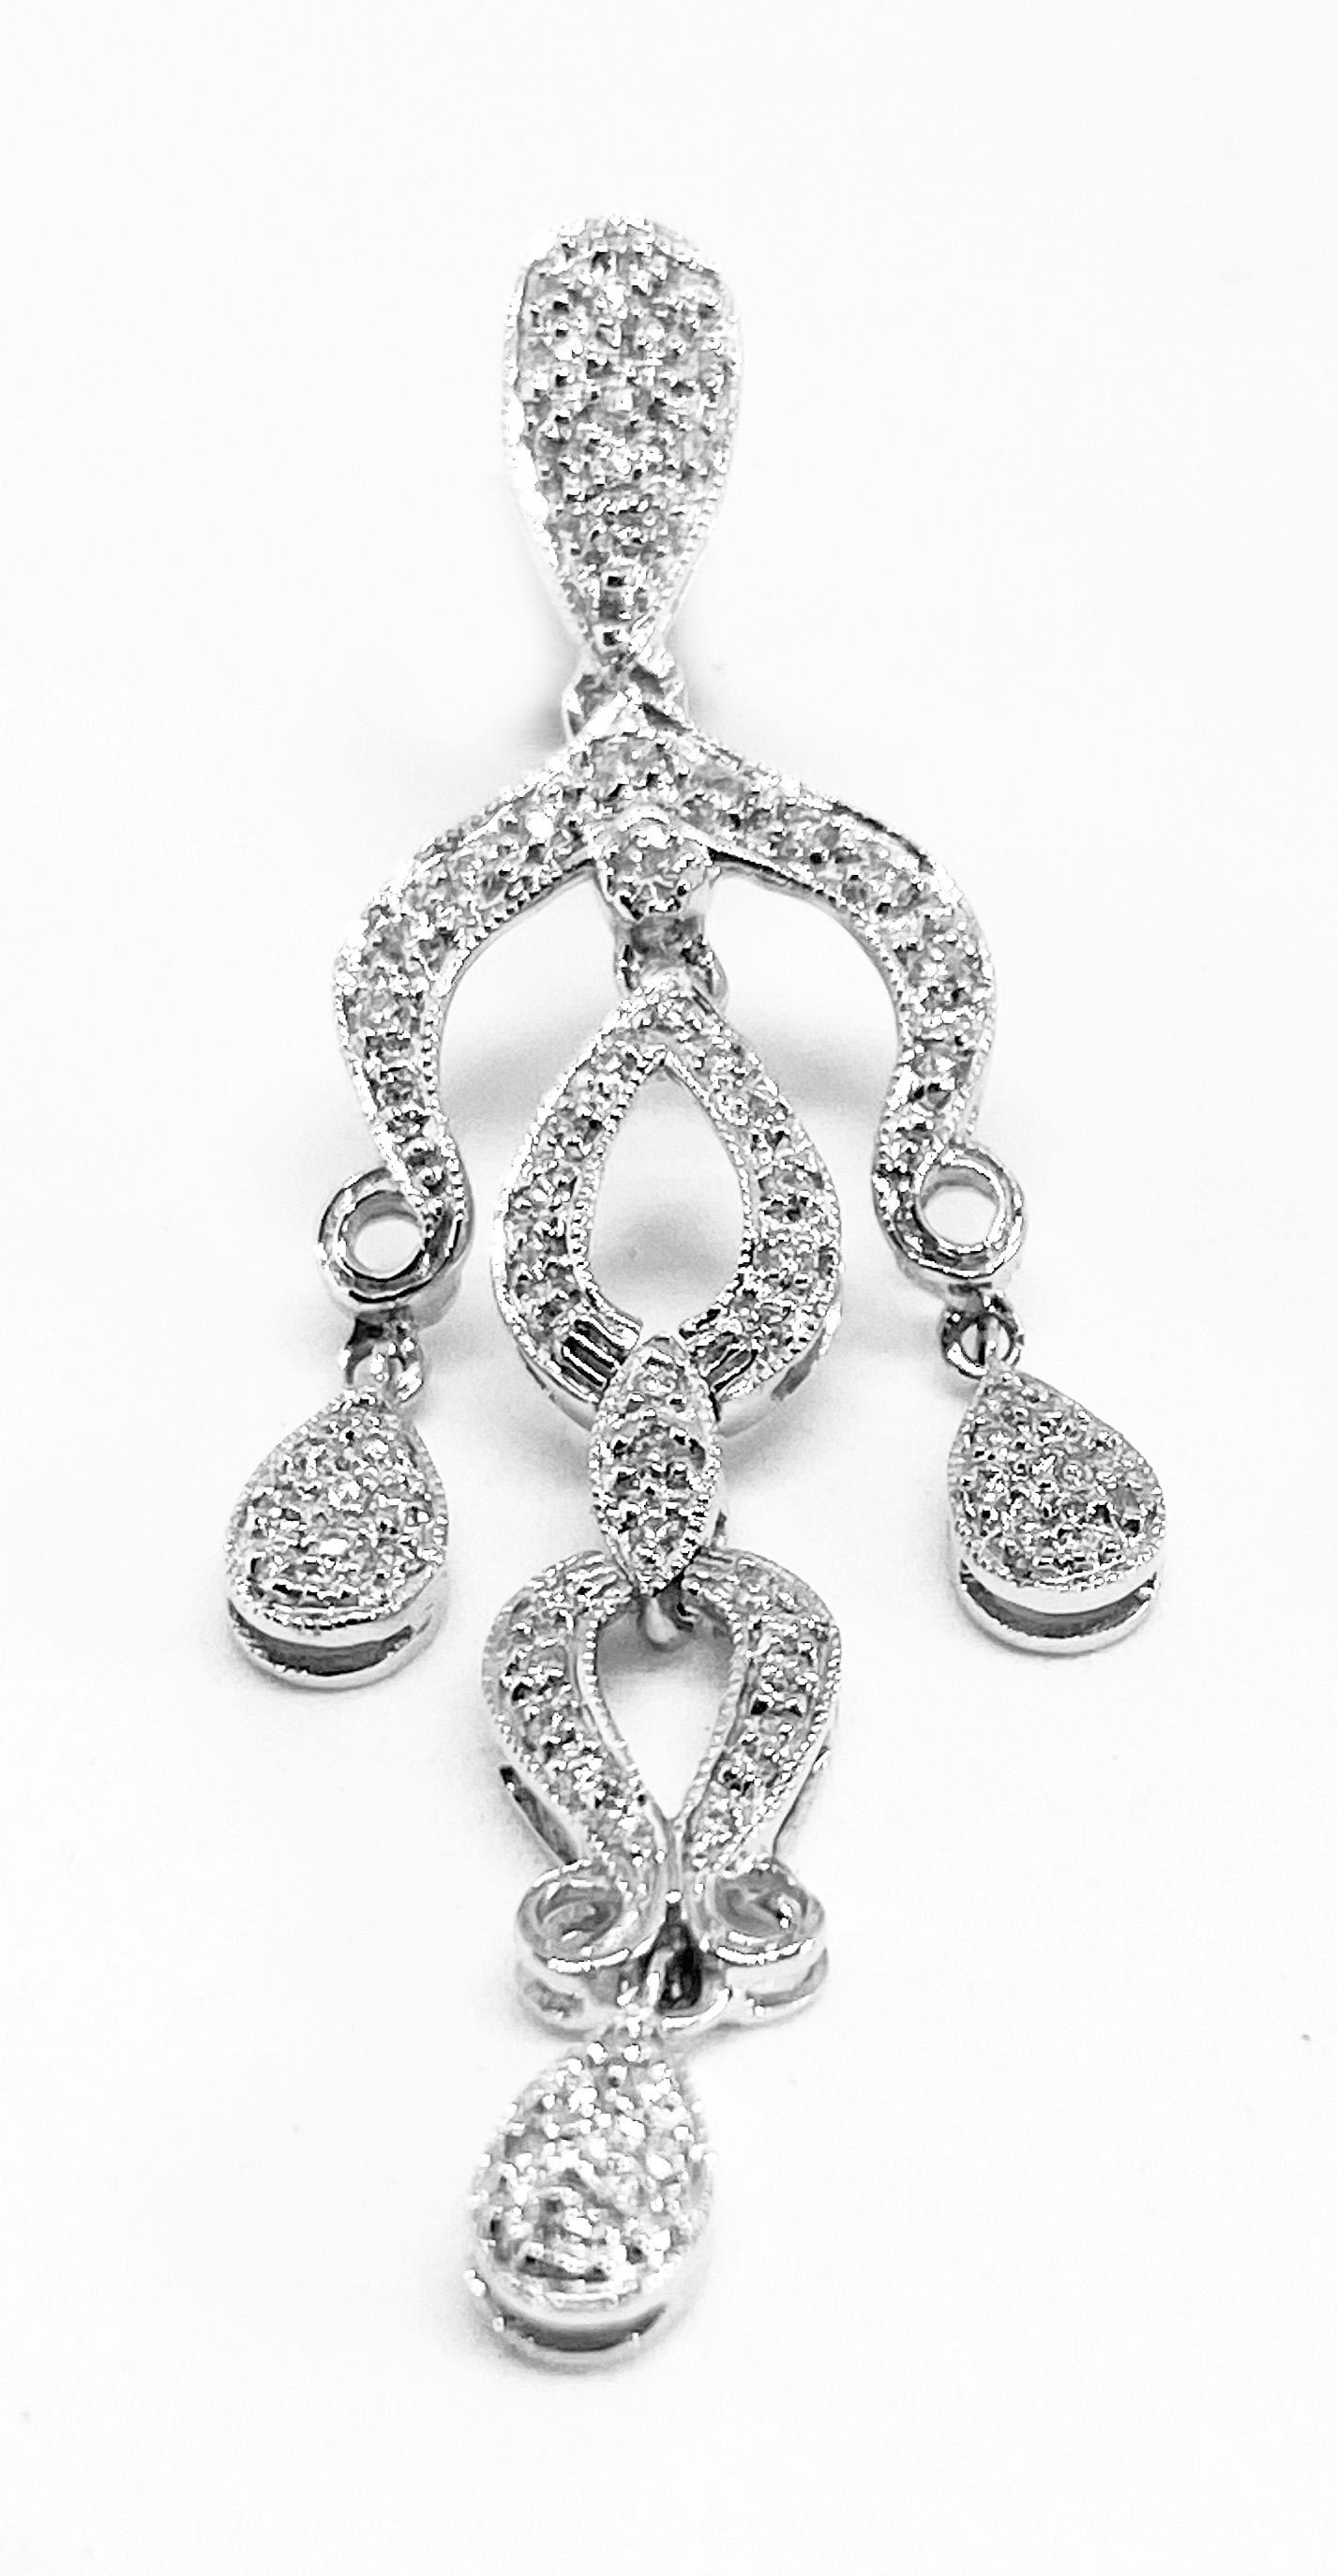 Contemporary 1.00 carat Diamond White Gold Chandelier Earrings For Sale